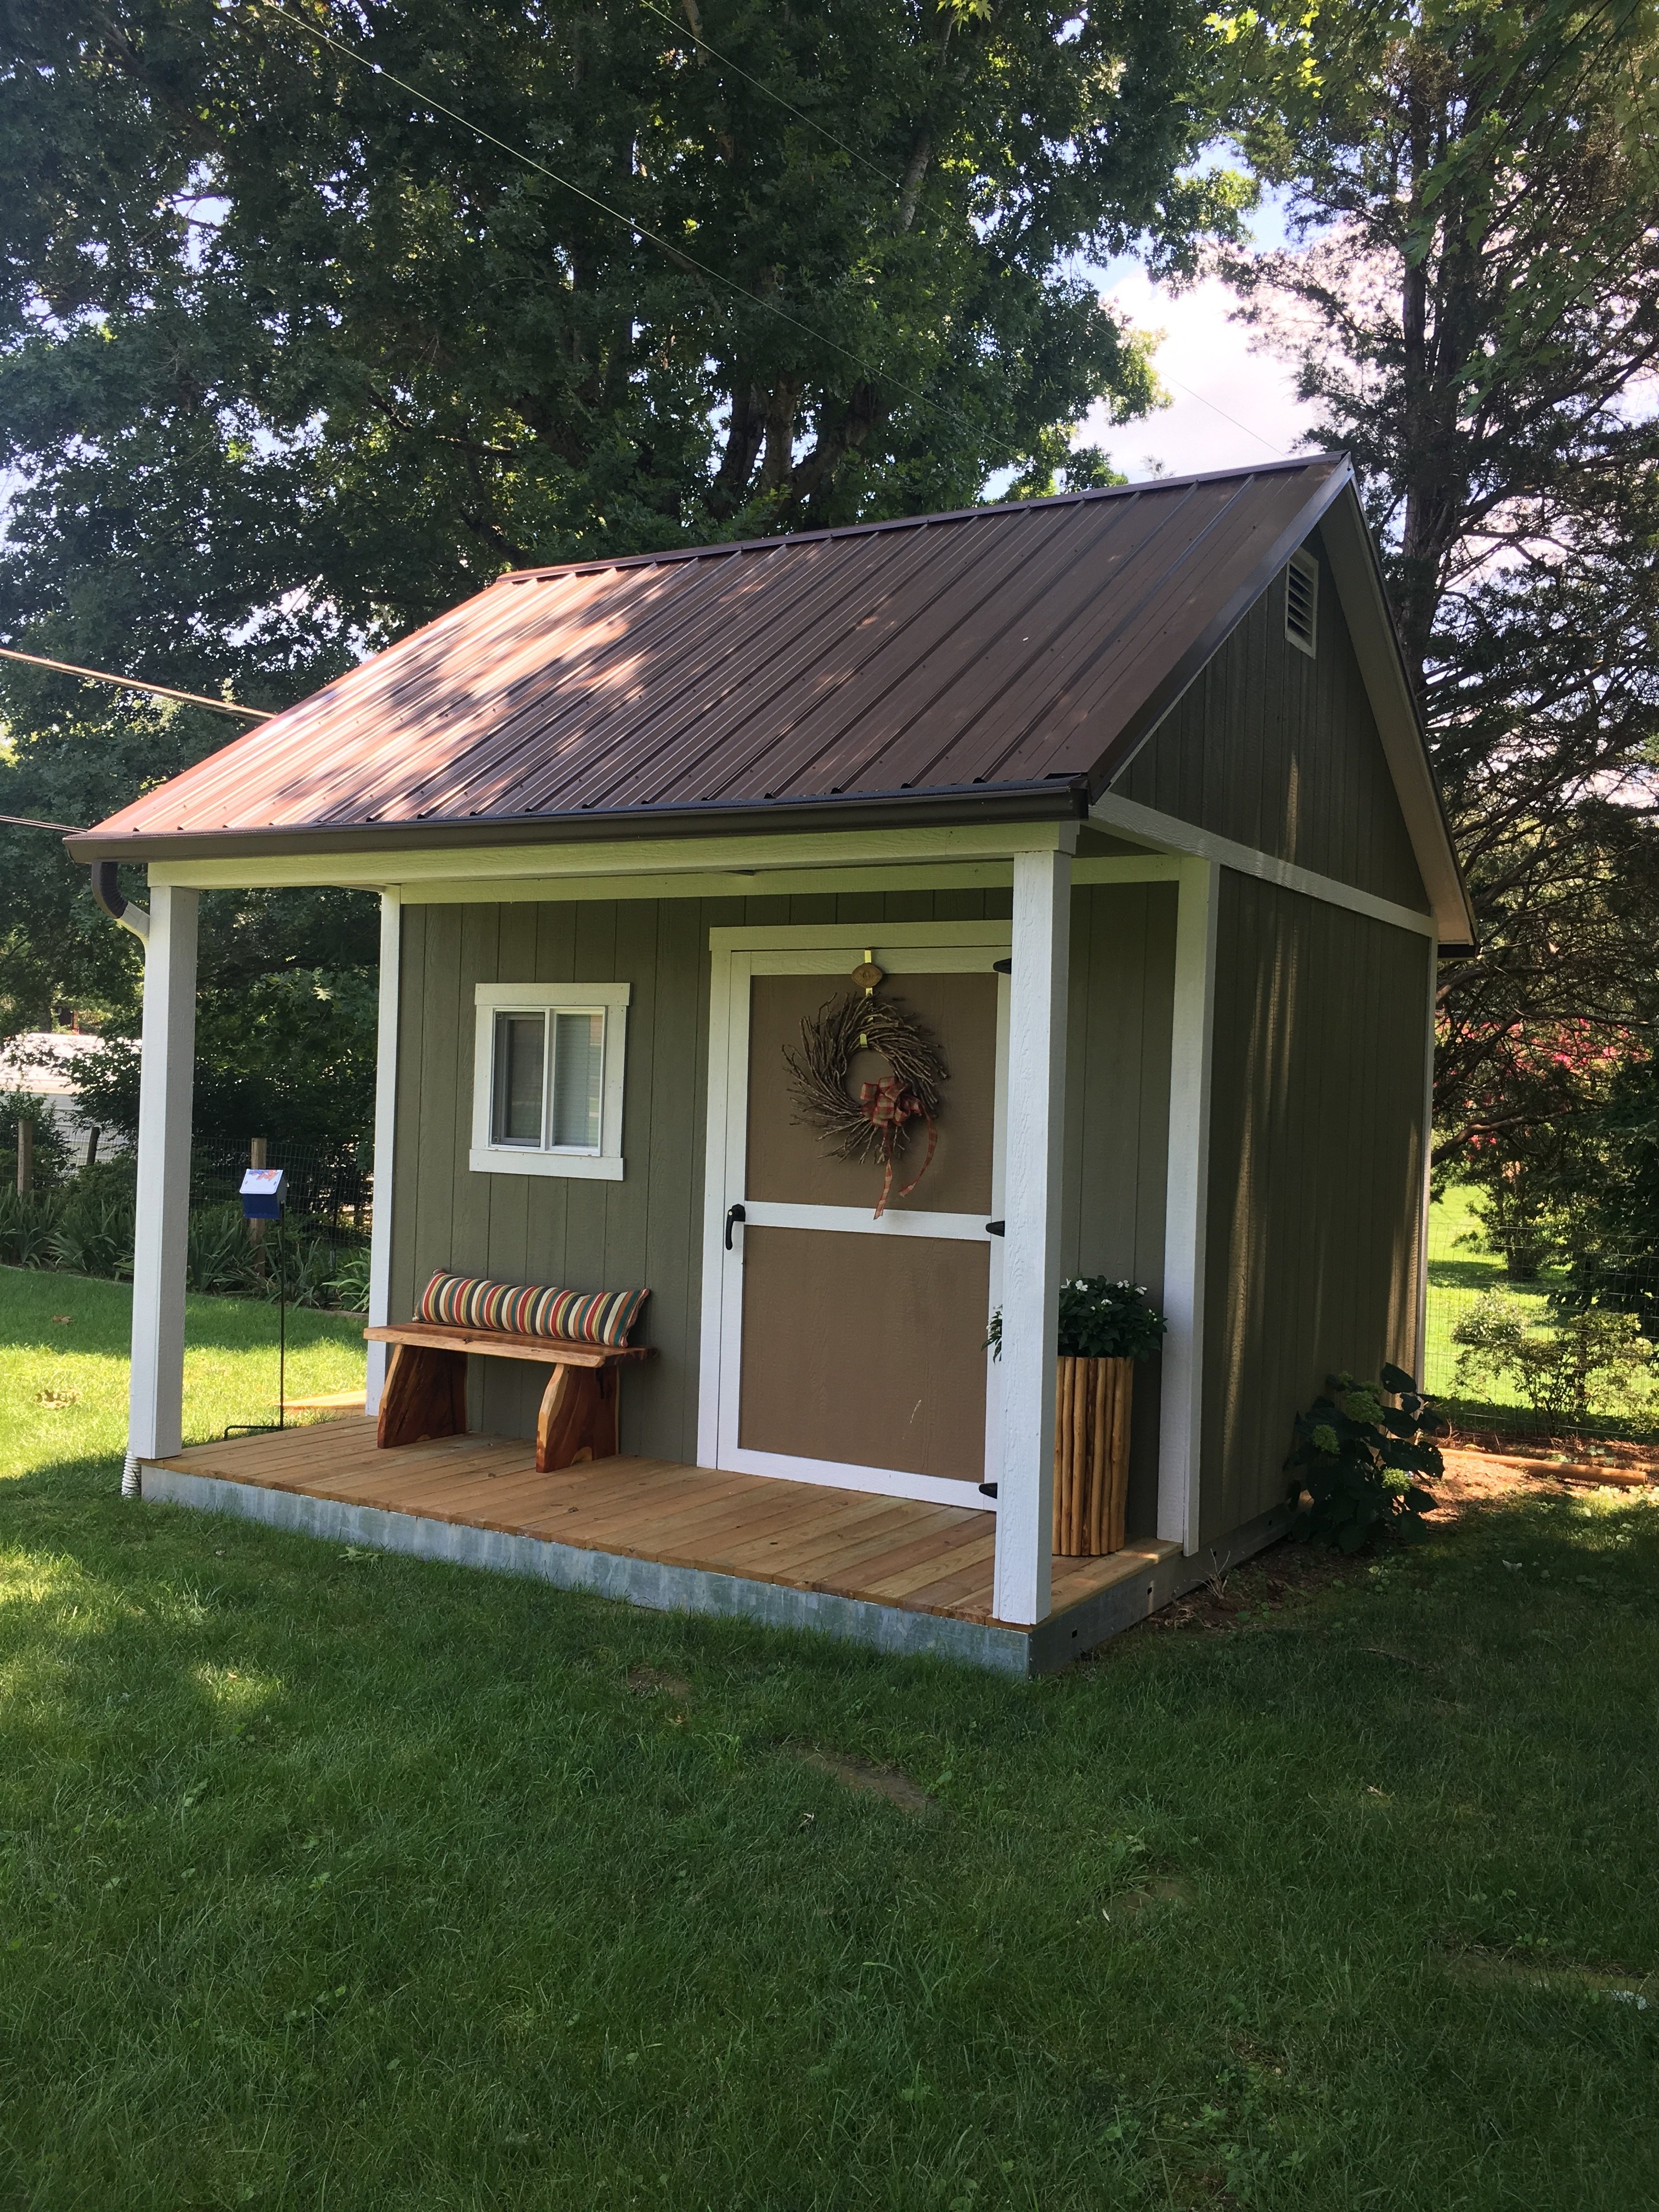 A Shed Full of Southern Charm – Tuff Shed